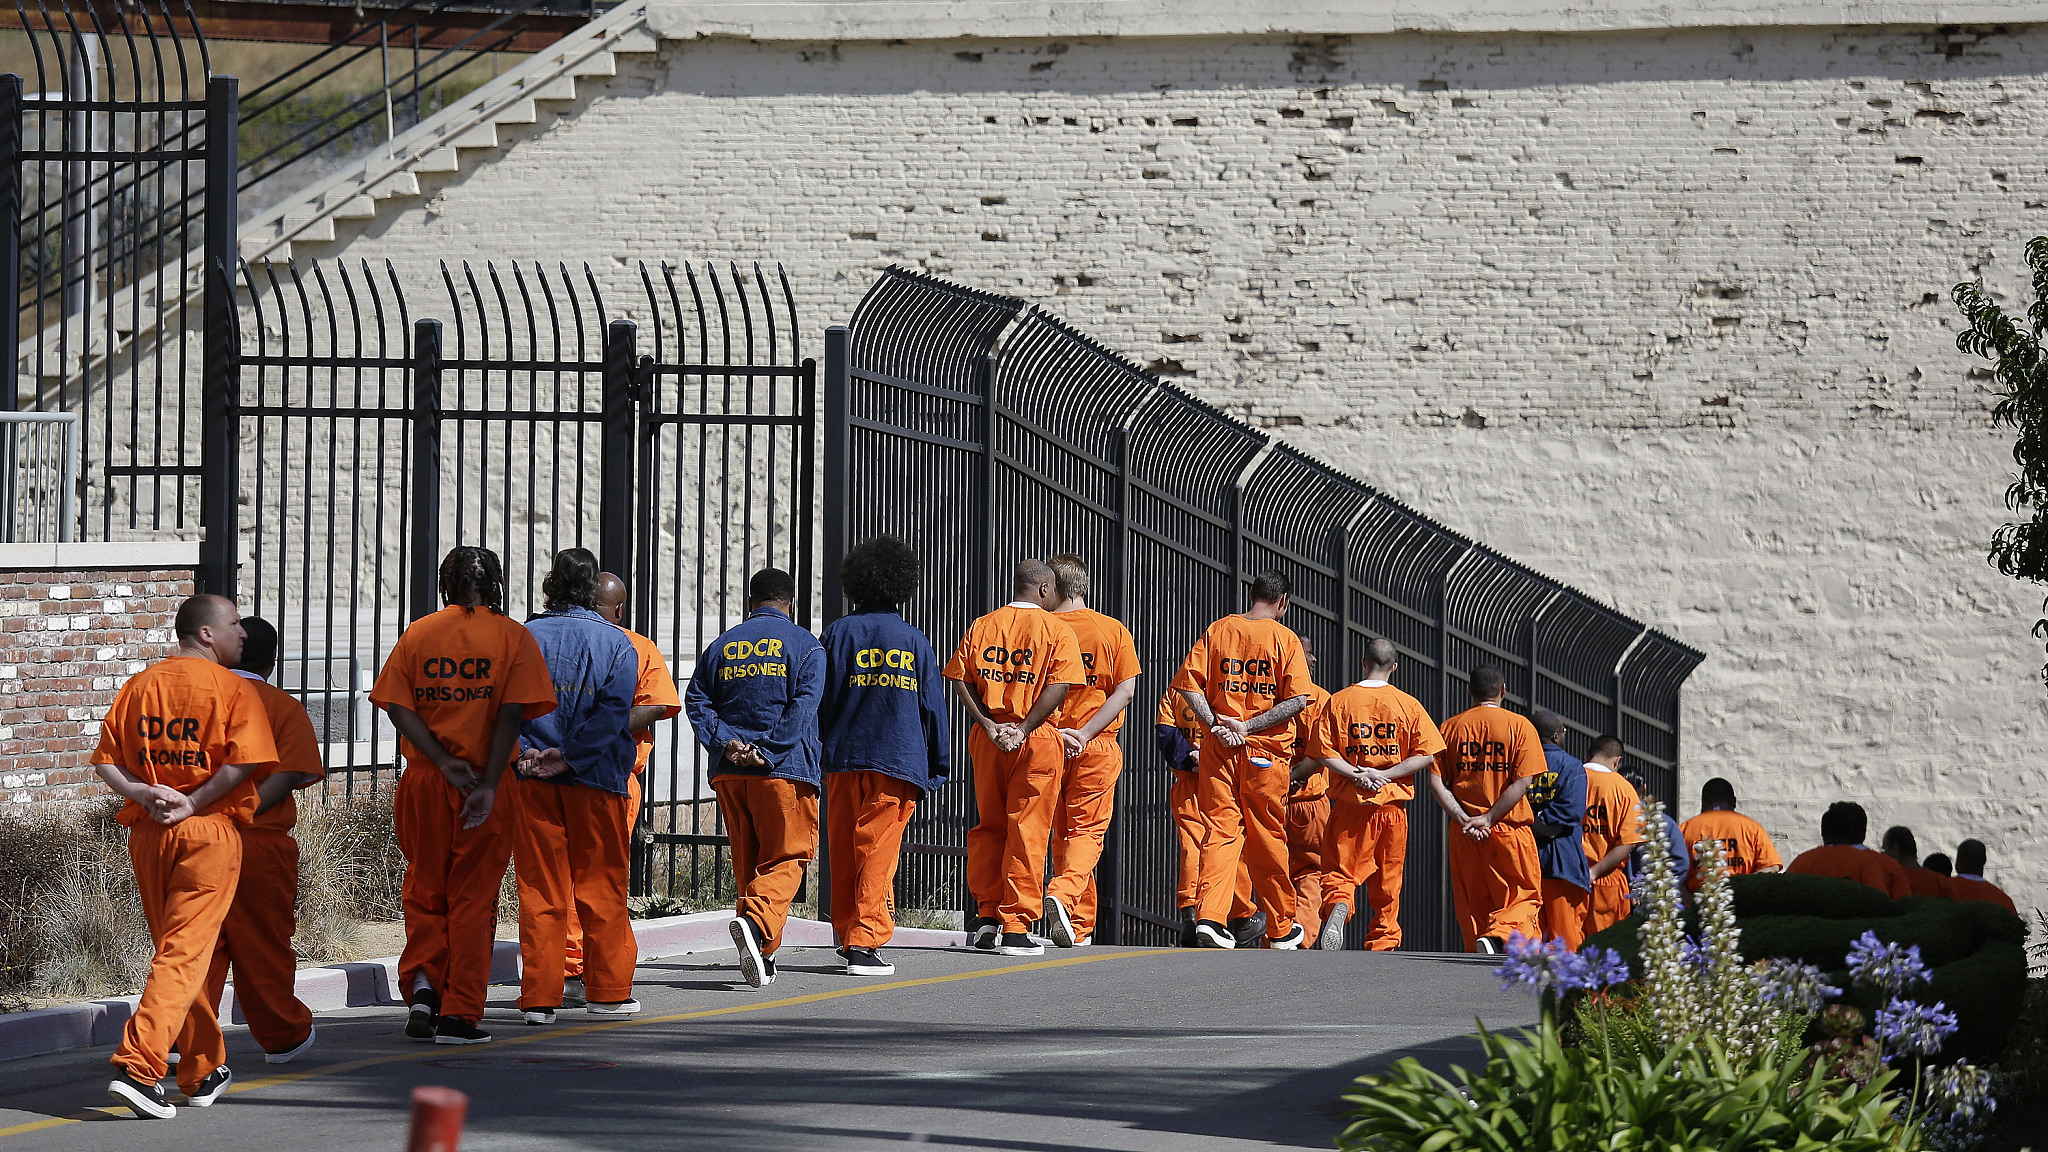 A row of general population inmates walk in a line at San Quentin State Prison in San Quentin, California, August 16, 2016. /VCG